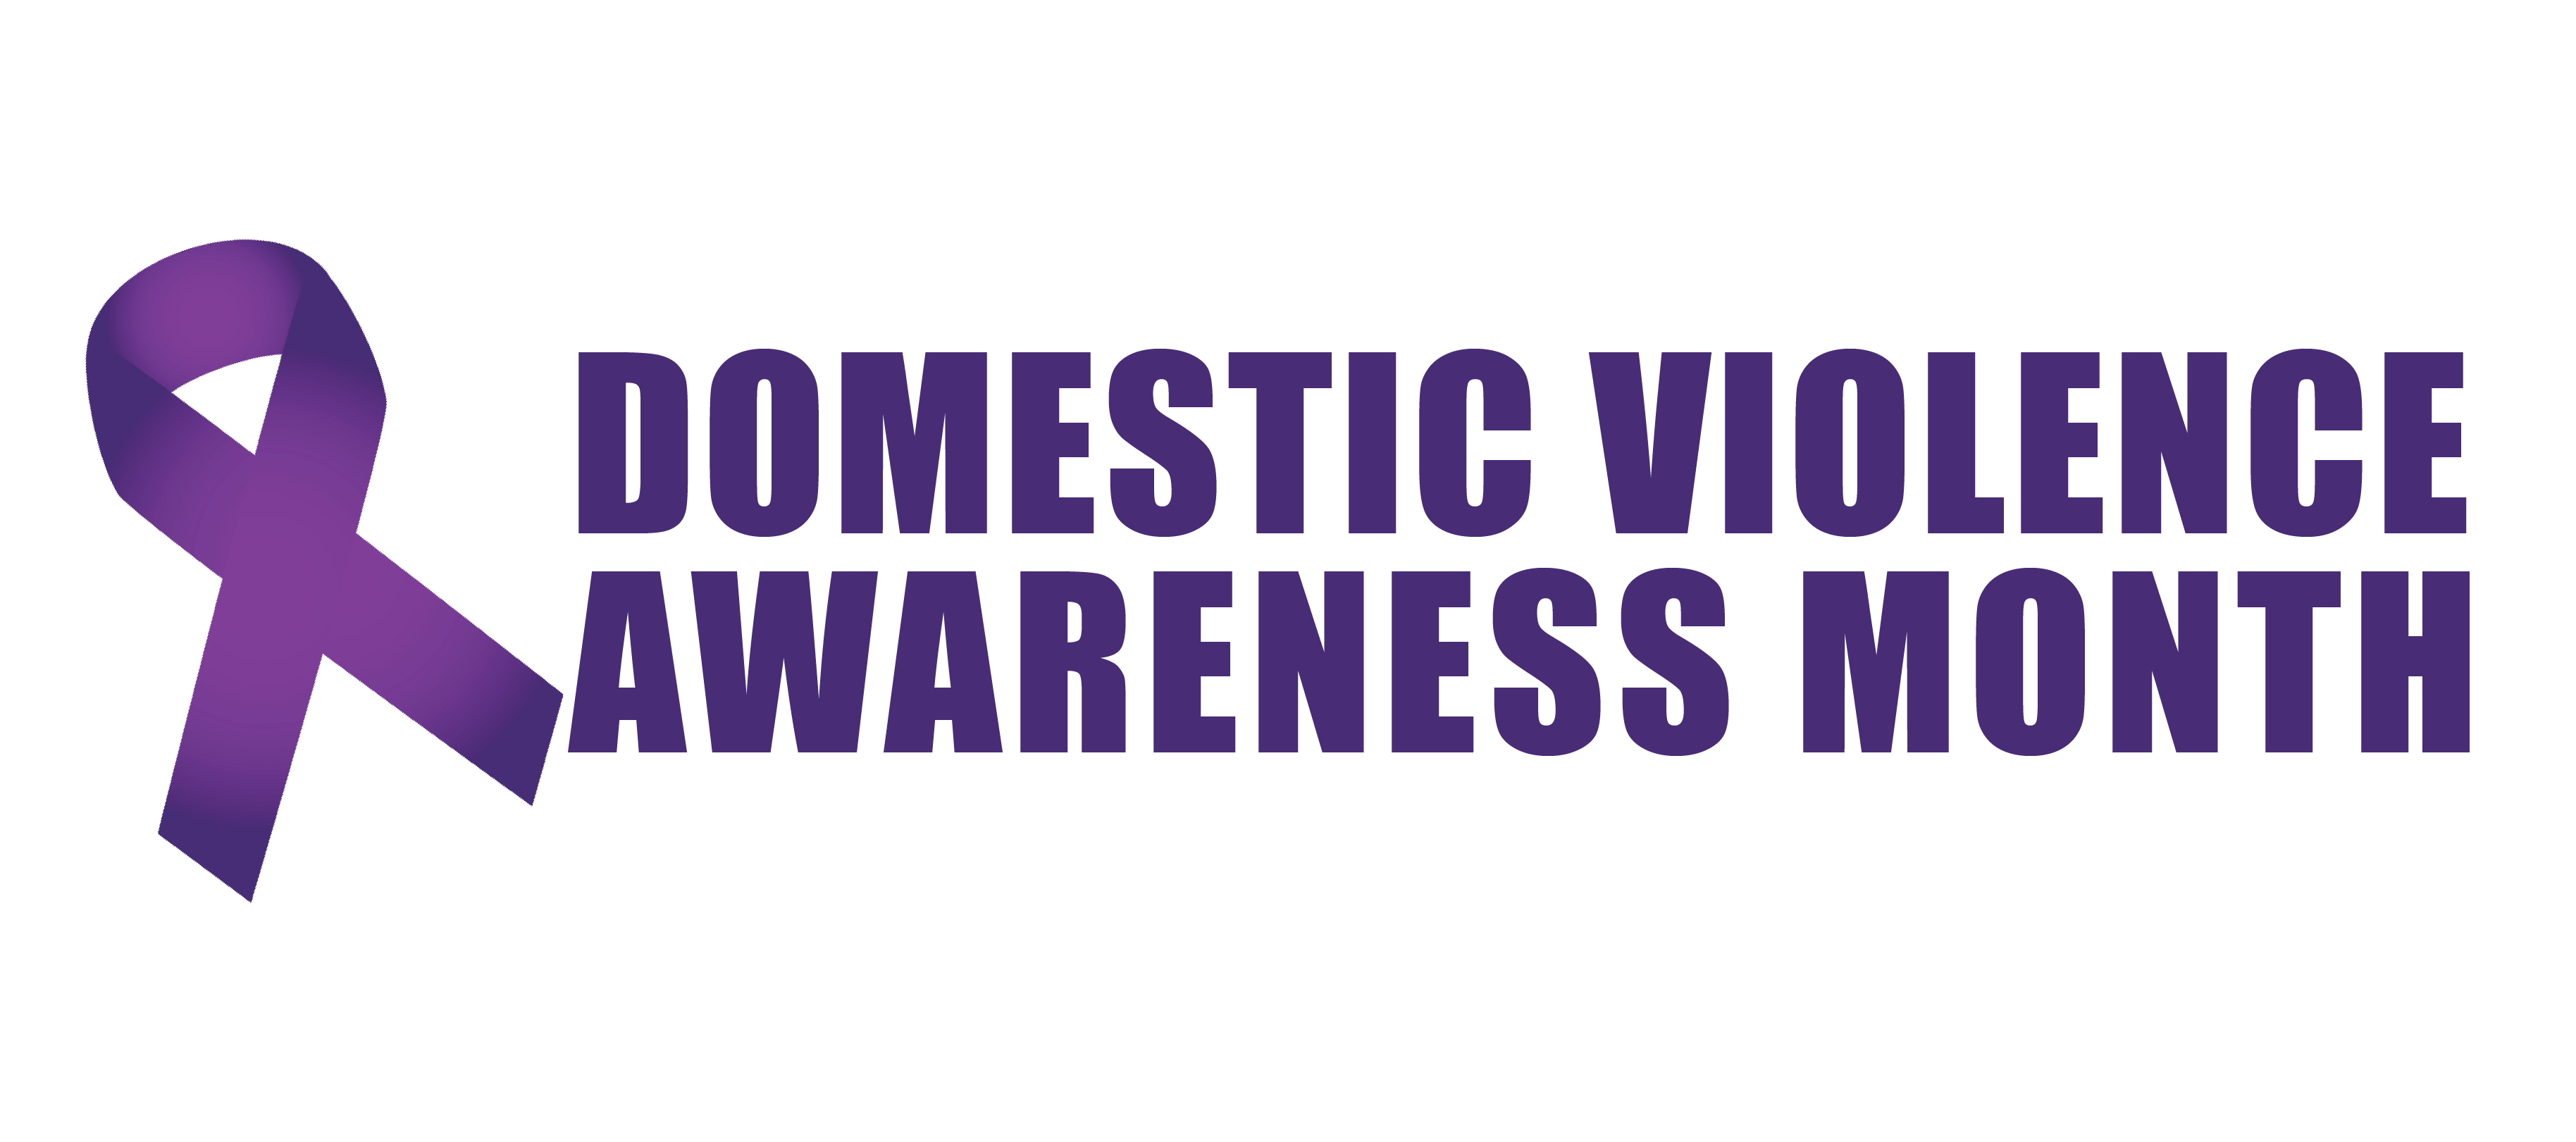 Words "Domestic Violence Awareness Month" and a purple ribbon